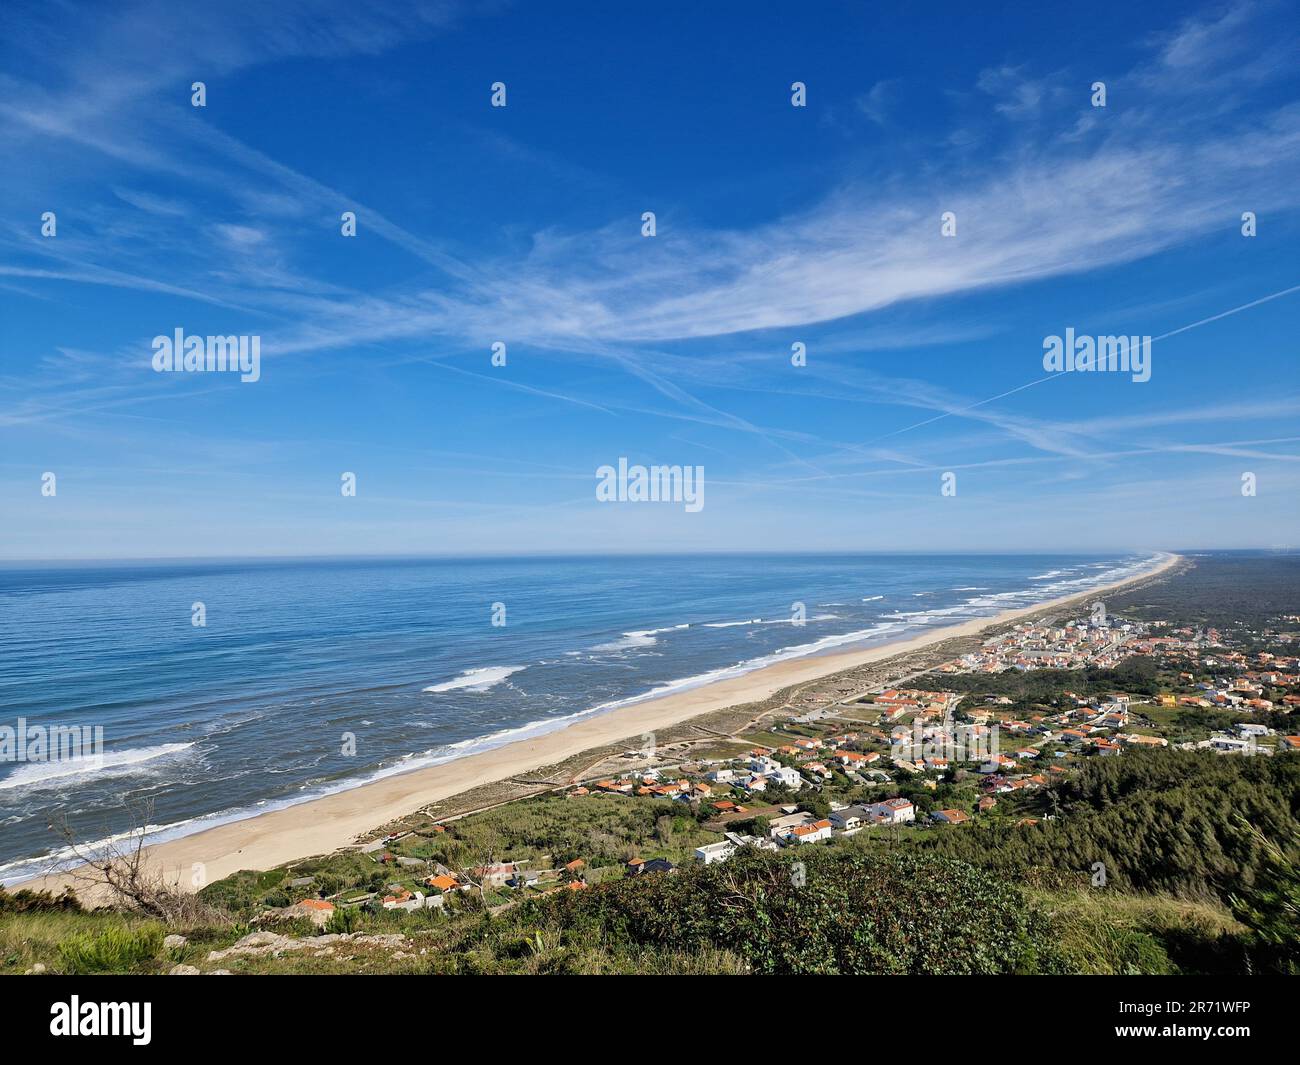 View from the top of mountain over Murtinheira, Quiaios Beach and residential area. View over the vast blue Atlantic ocean, blue sky and neighborhood Stock Photo